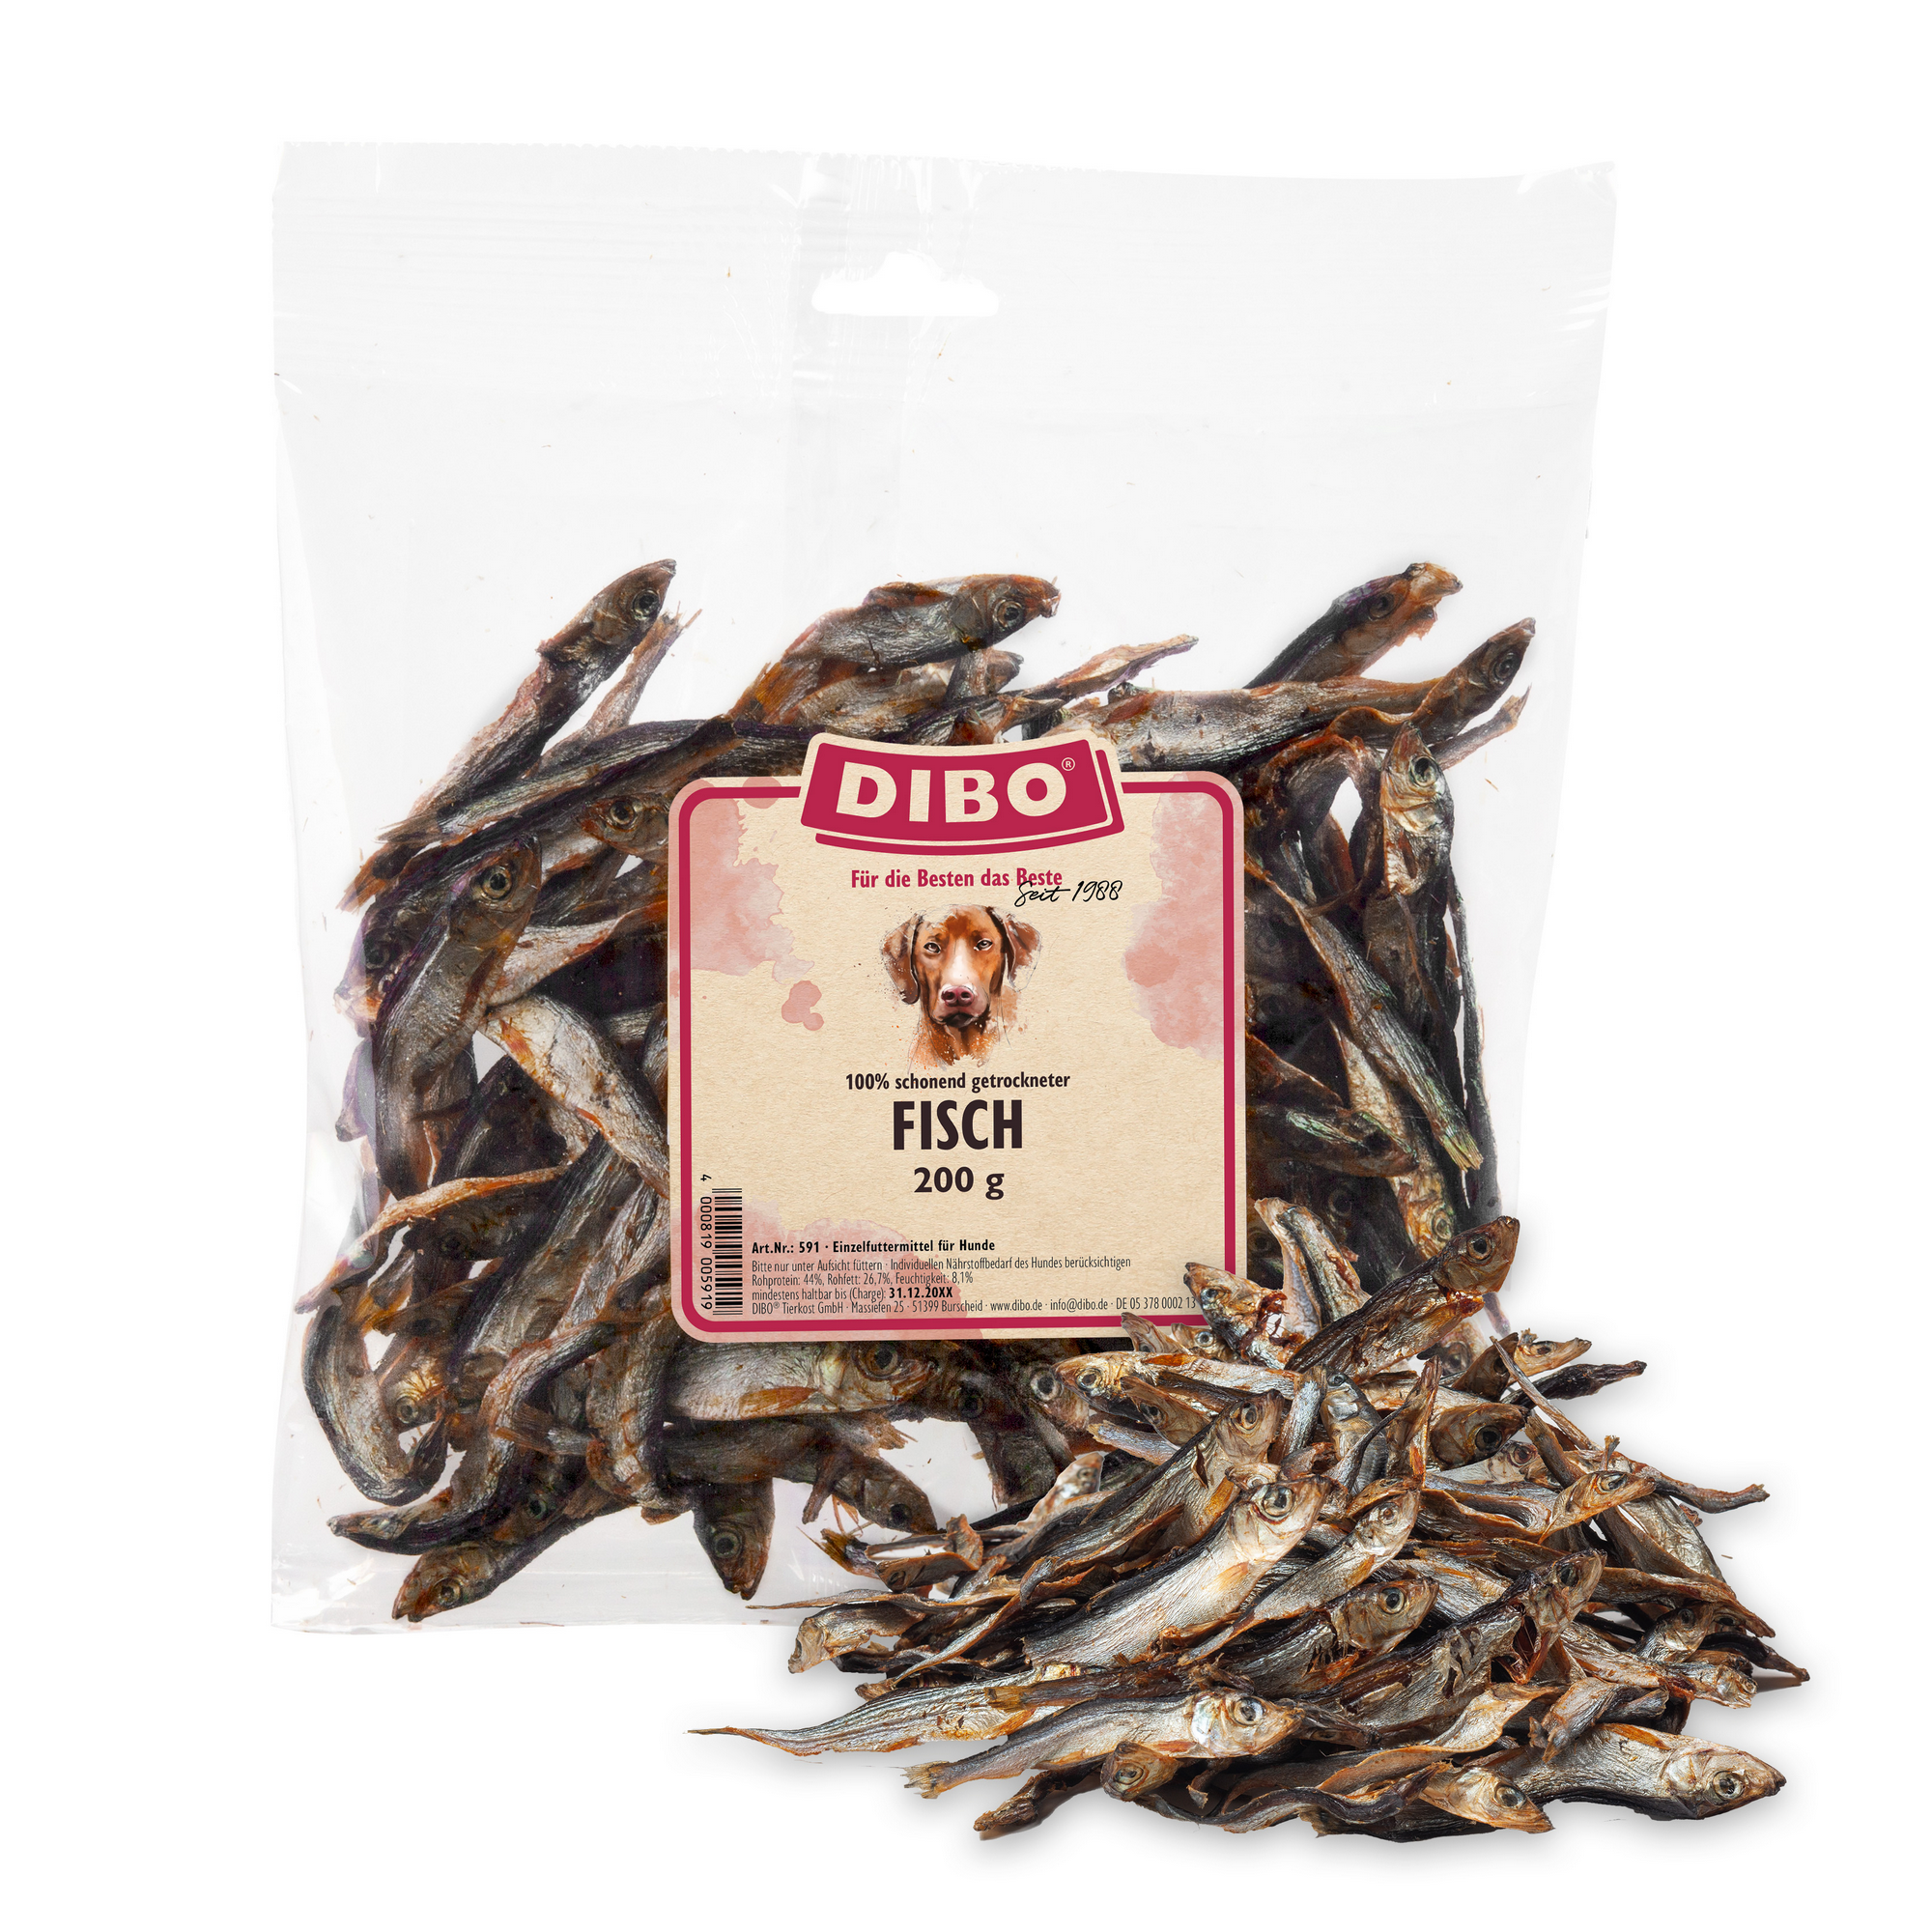 Hundesnack Fisch getrocknet 200 g + product picture